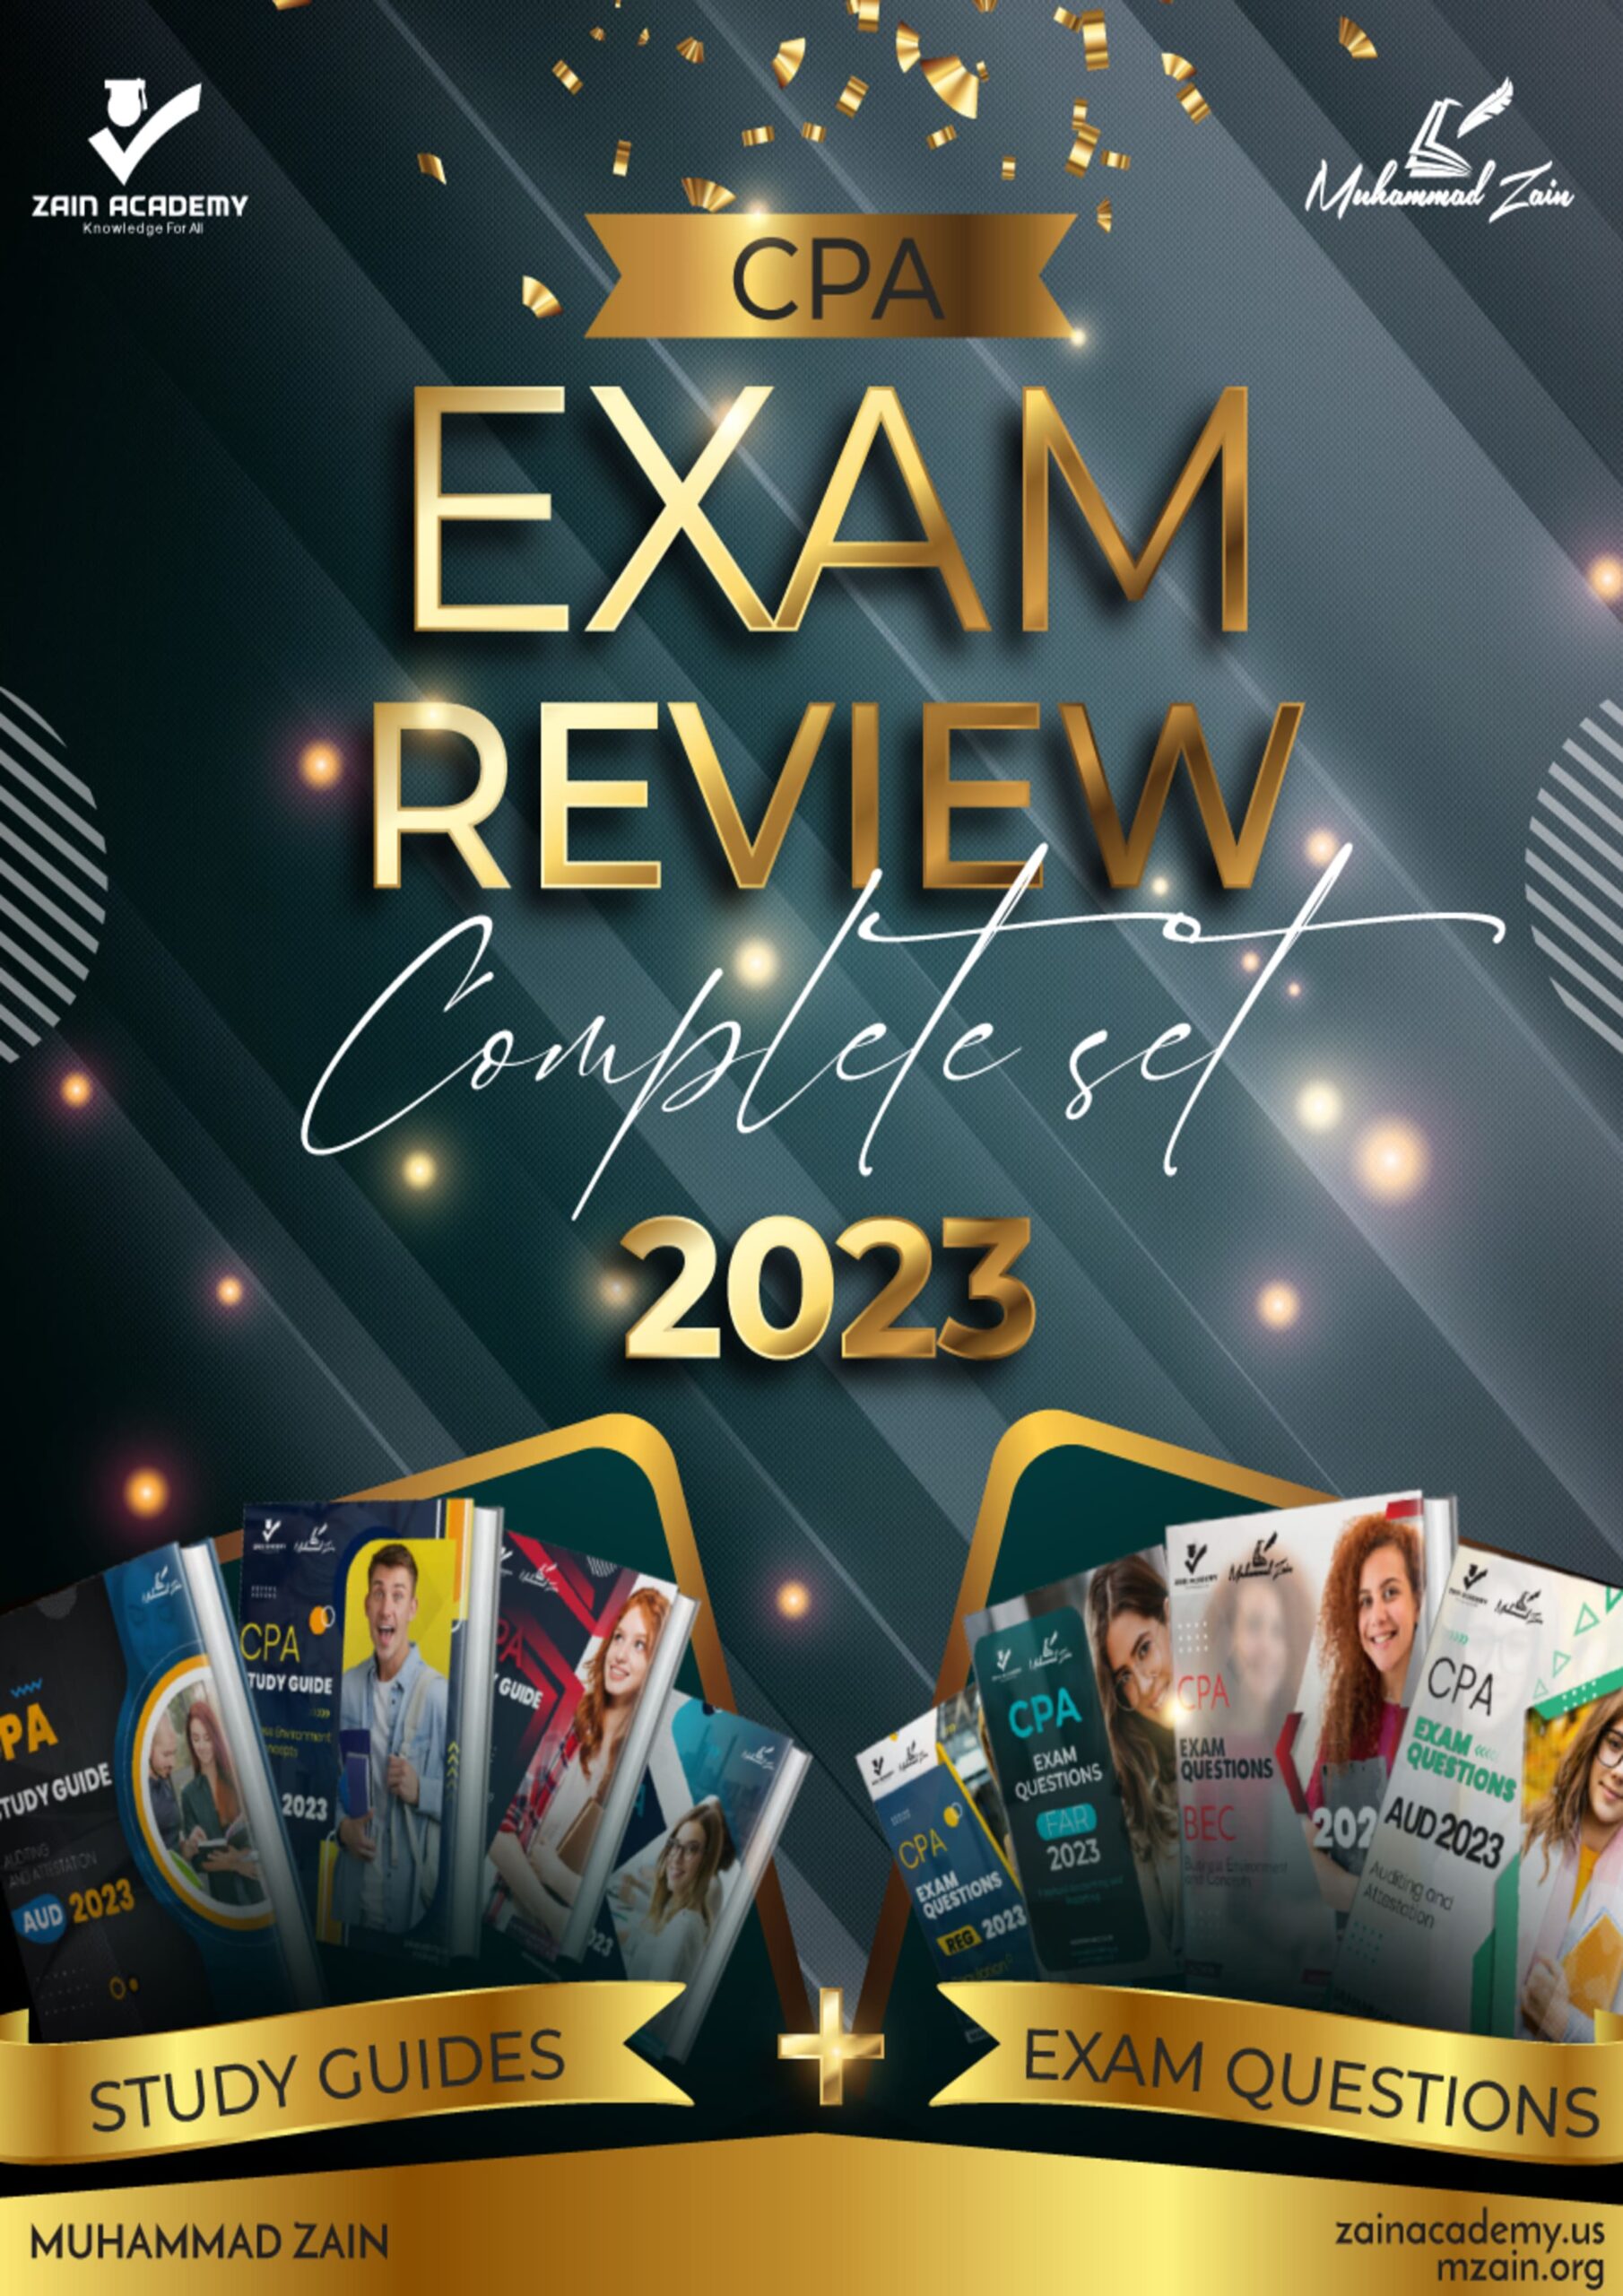 certified public accountant (cpa) exam review complete set 2023